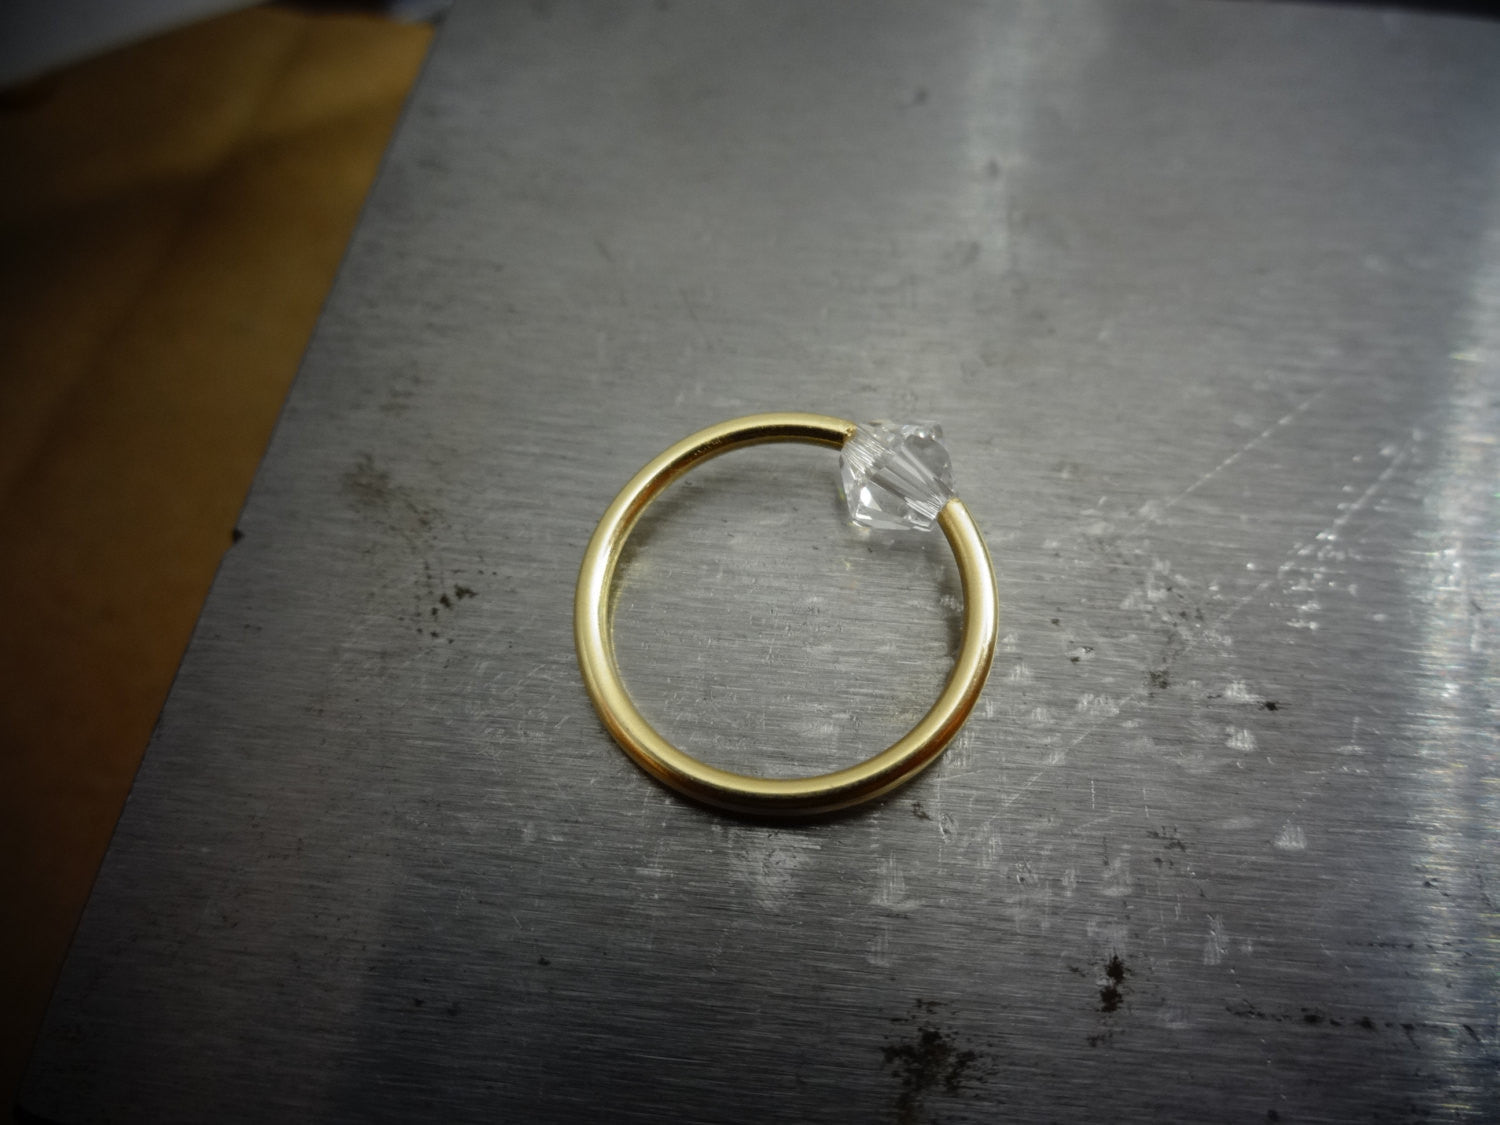 Captive Bead Ring made with 5mm CLEAR Swarovski Crystal - 16 ga Hoop - 14k Gold (Y, W, or R), Sterling Silver, or Platinum